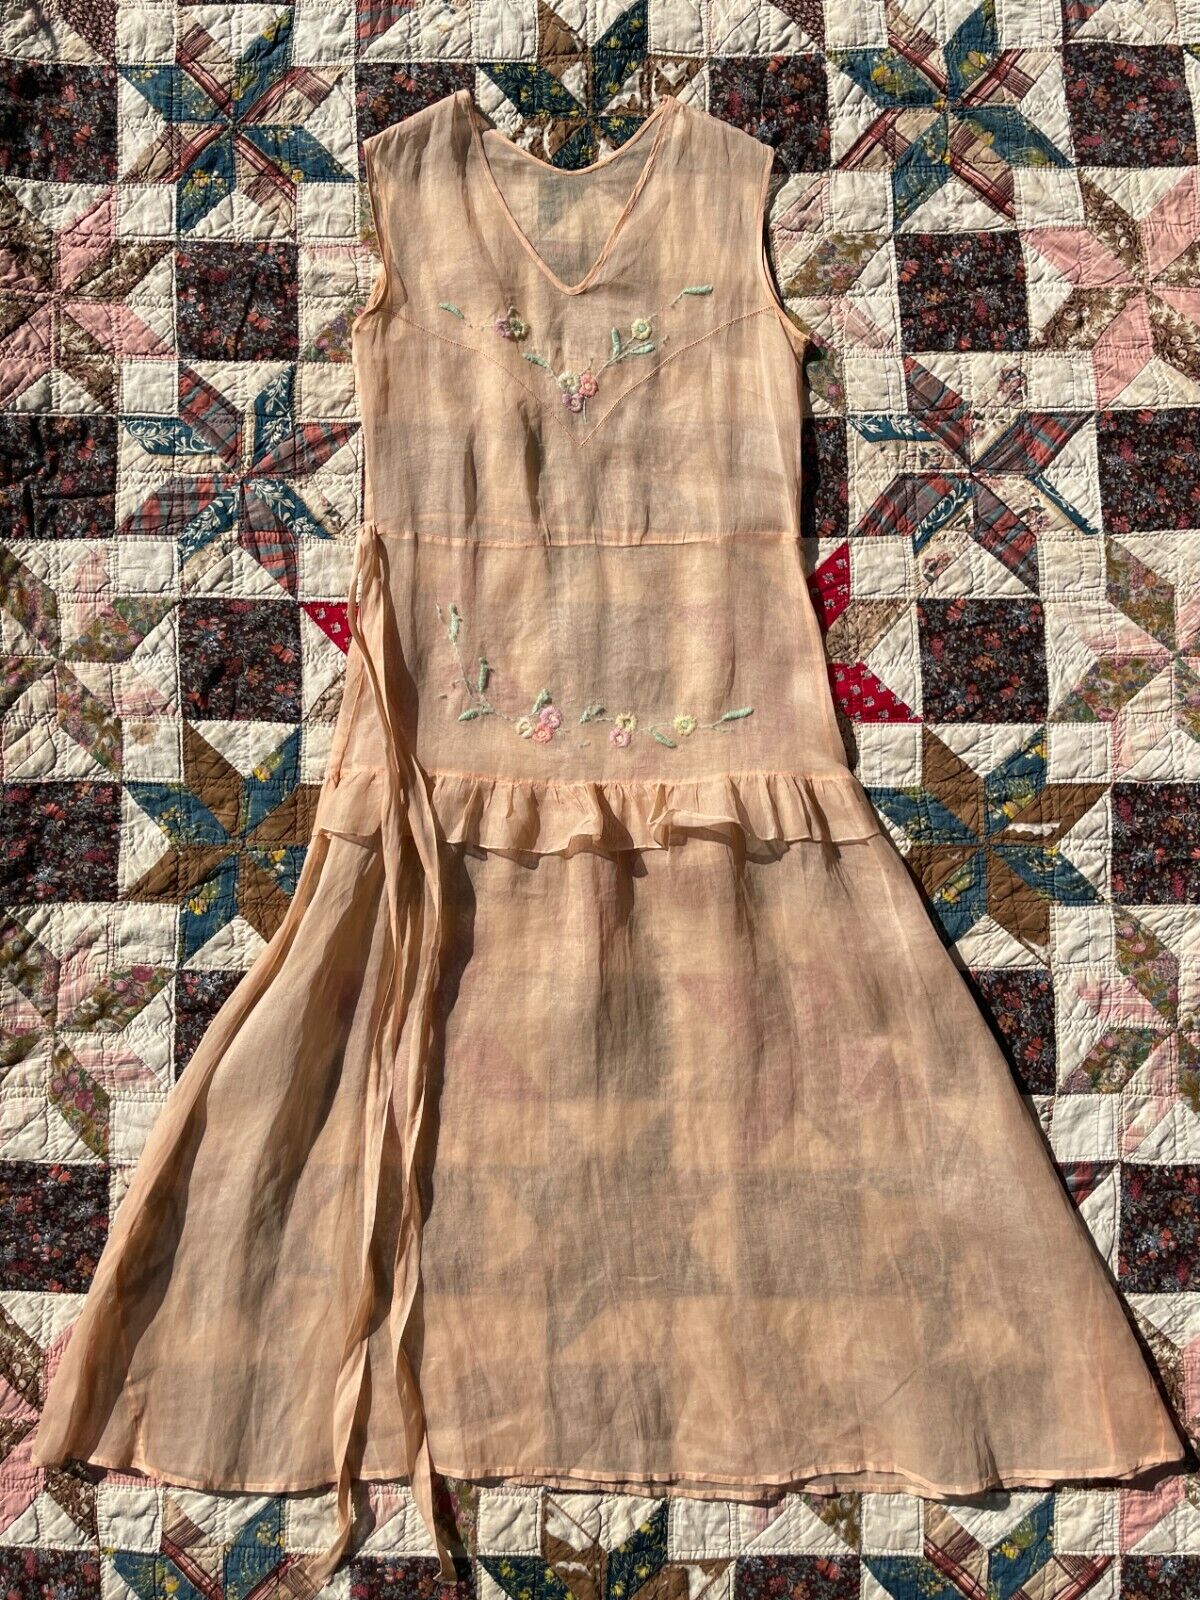 1930s 30s Silk Floral Embroidered Sheer Dress - image 1